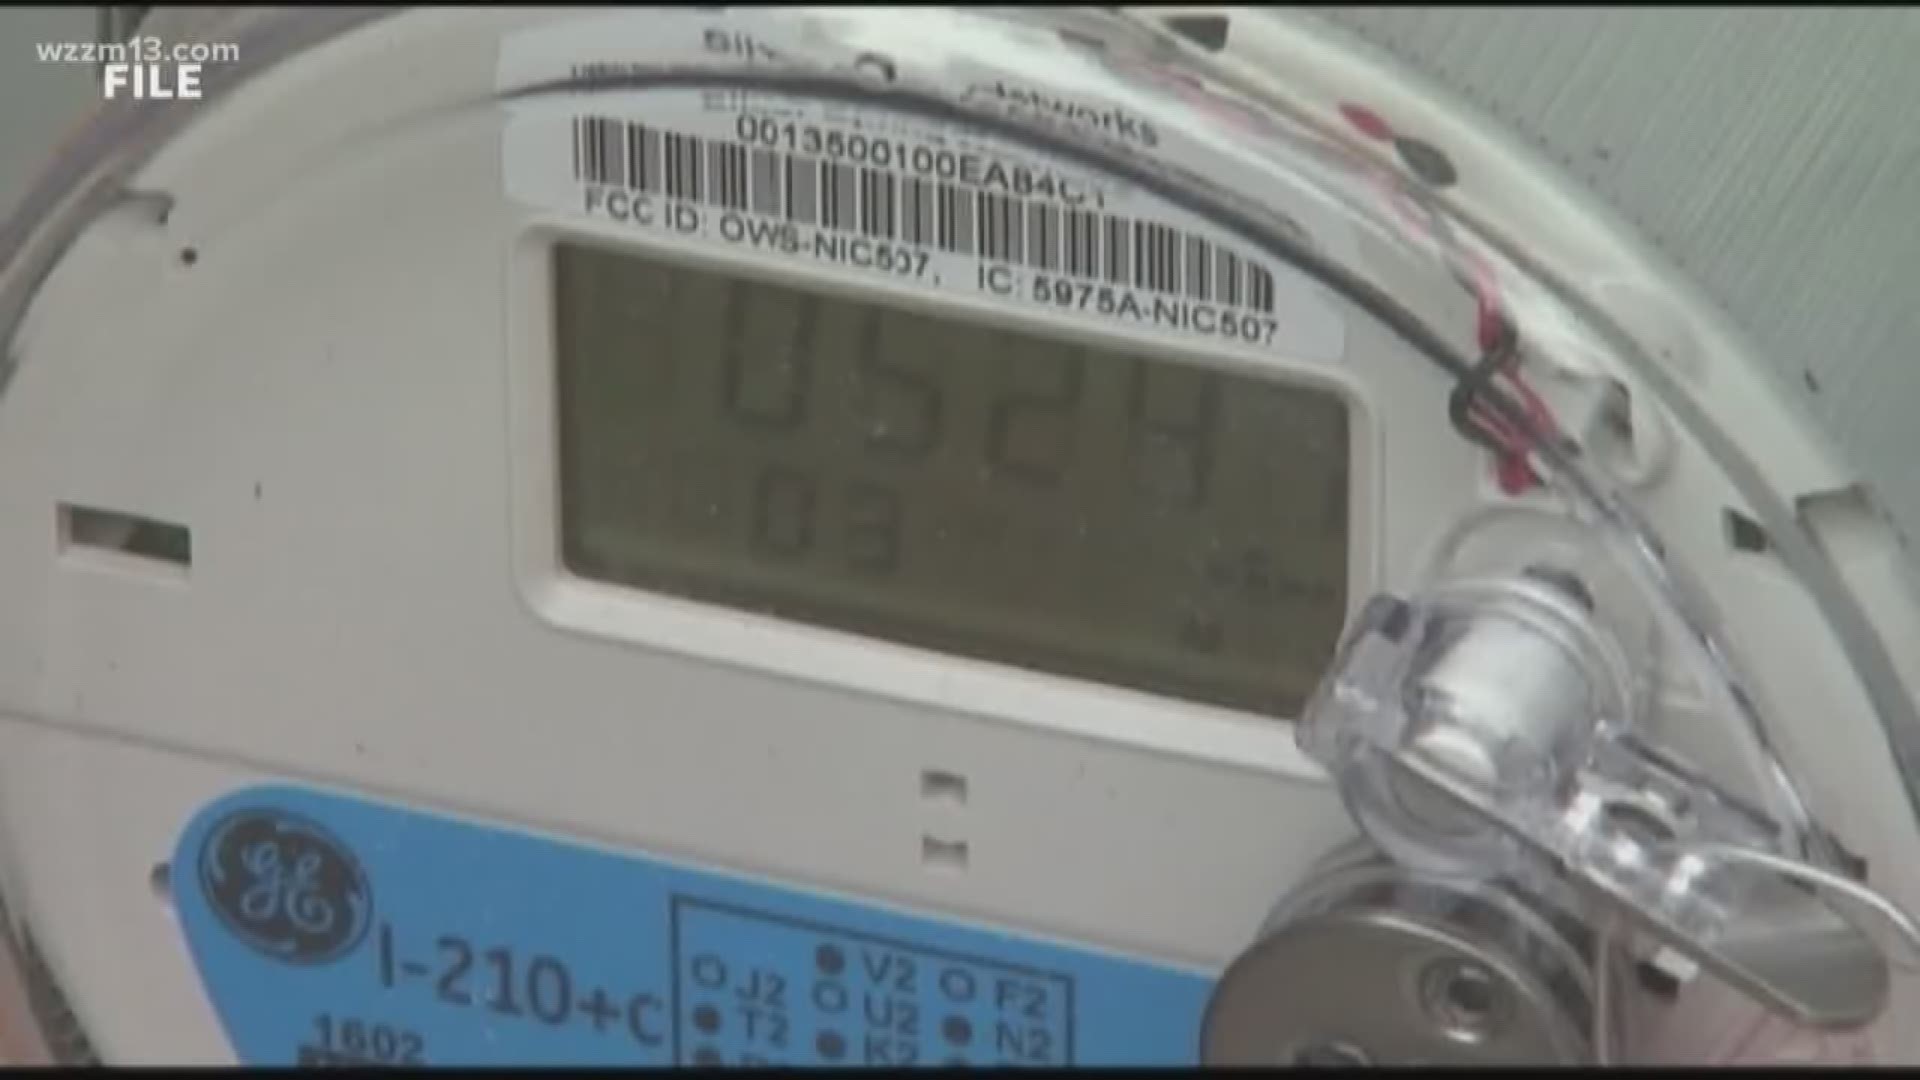 Scammers posing as Consumers Energy